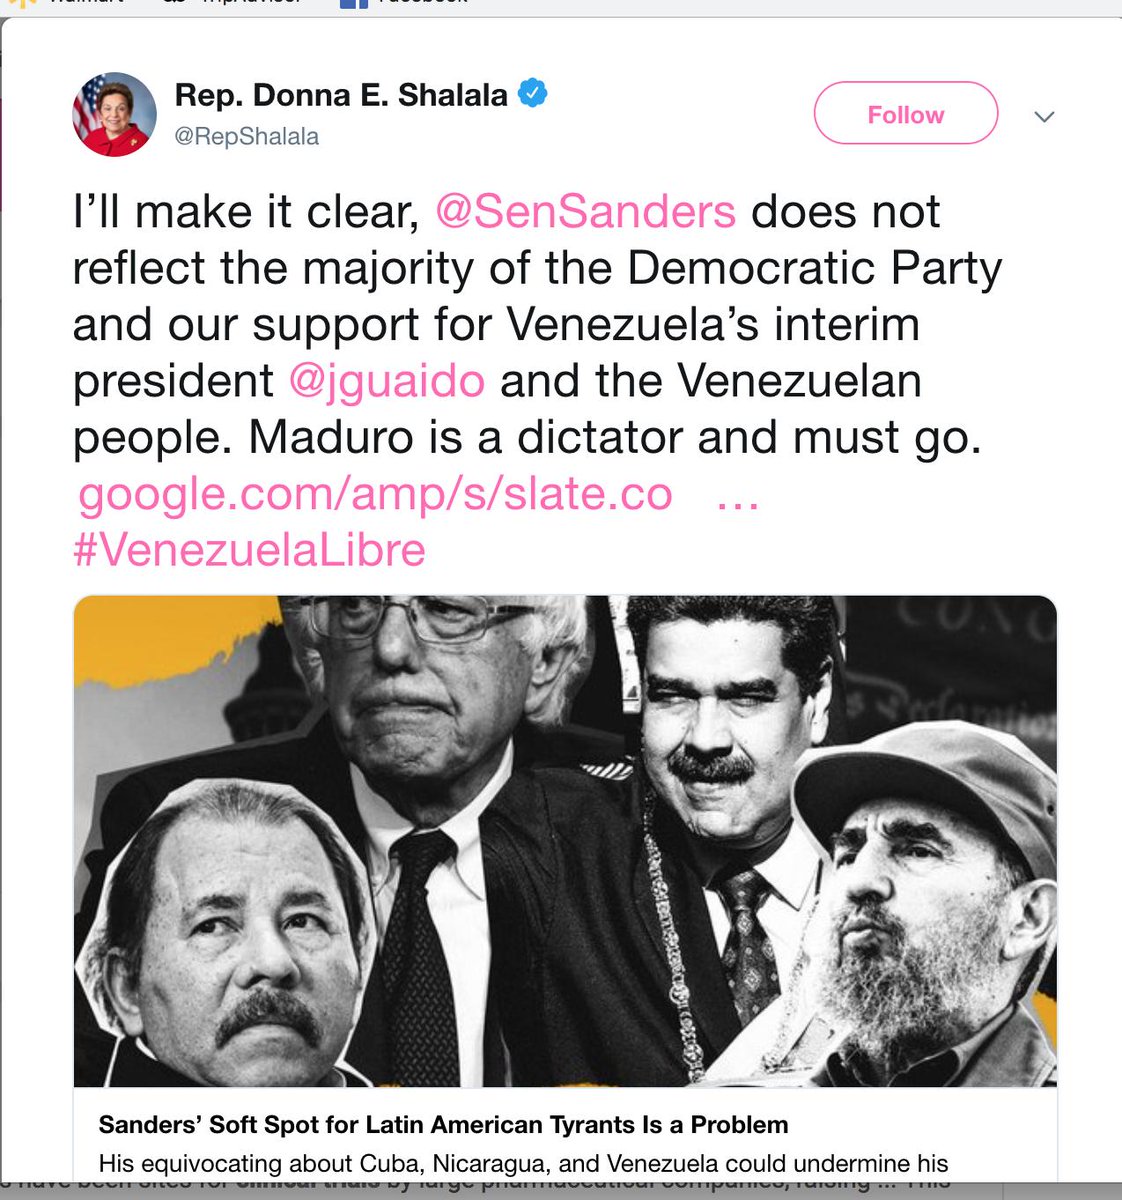 In addition to supporting a coup in Venezuela,  @RepShalala, when she was the Secretary of Health and Human Services, the CDC experimented on vulnerable populations in Zimbabwe. They may have deliberately infected 1000 people with HIV. https://www.citizen.org/sites/default/files/1415.pdf